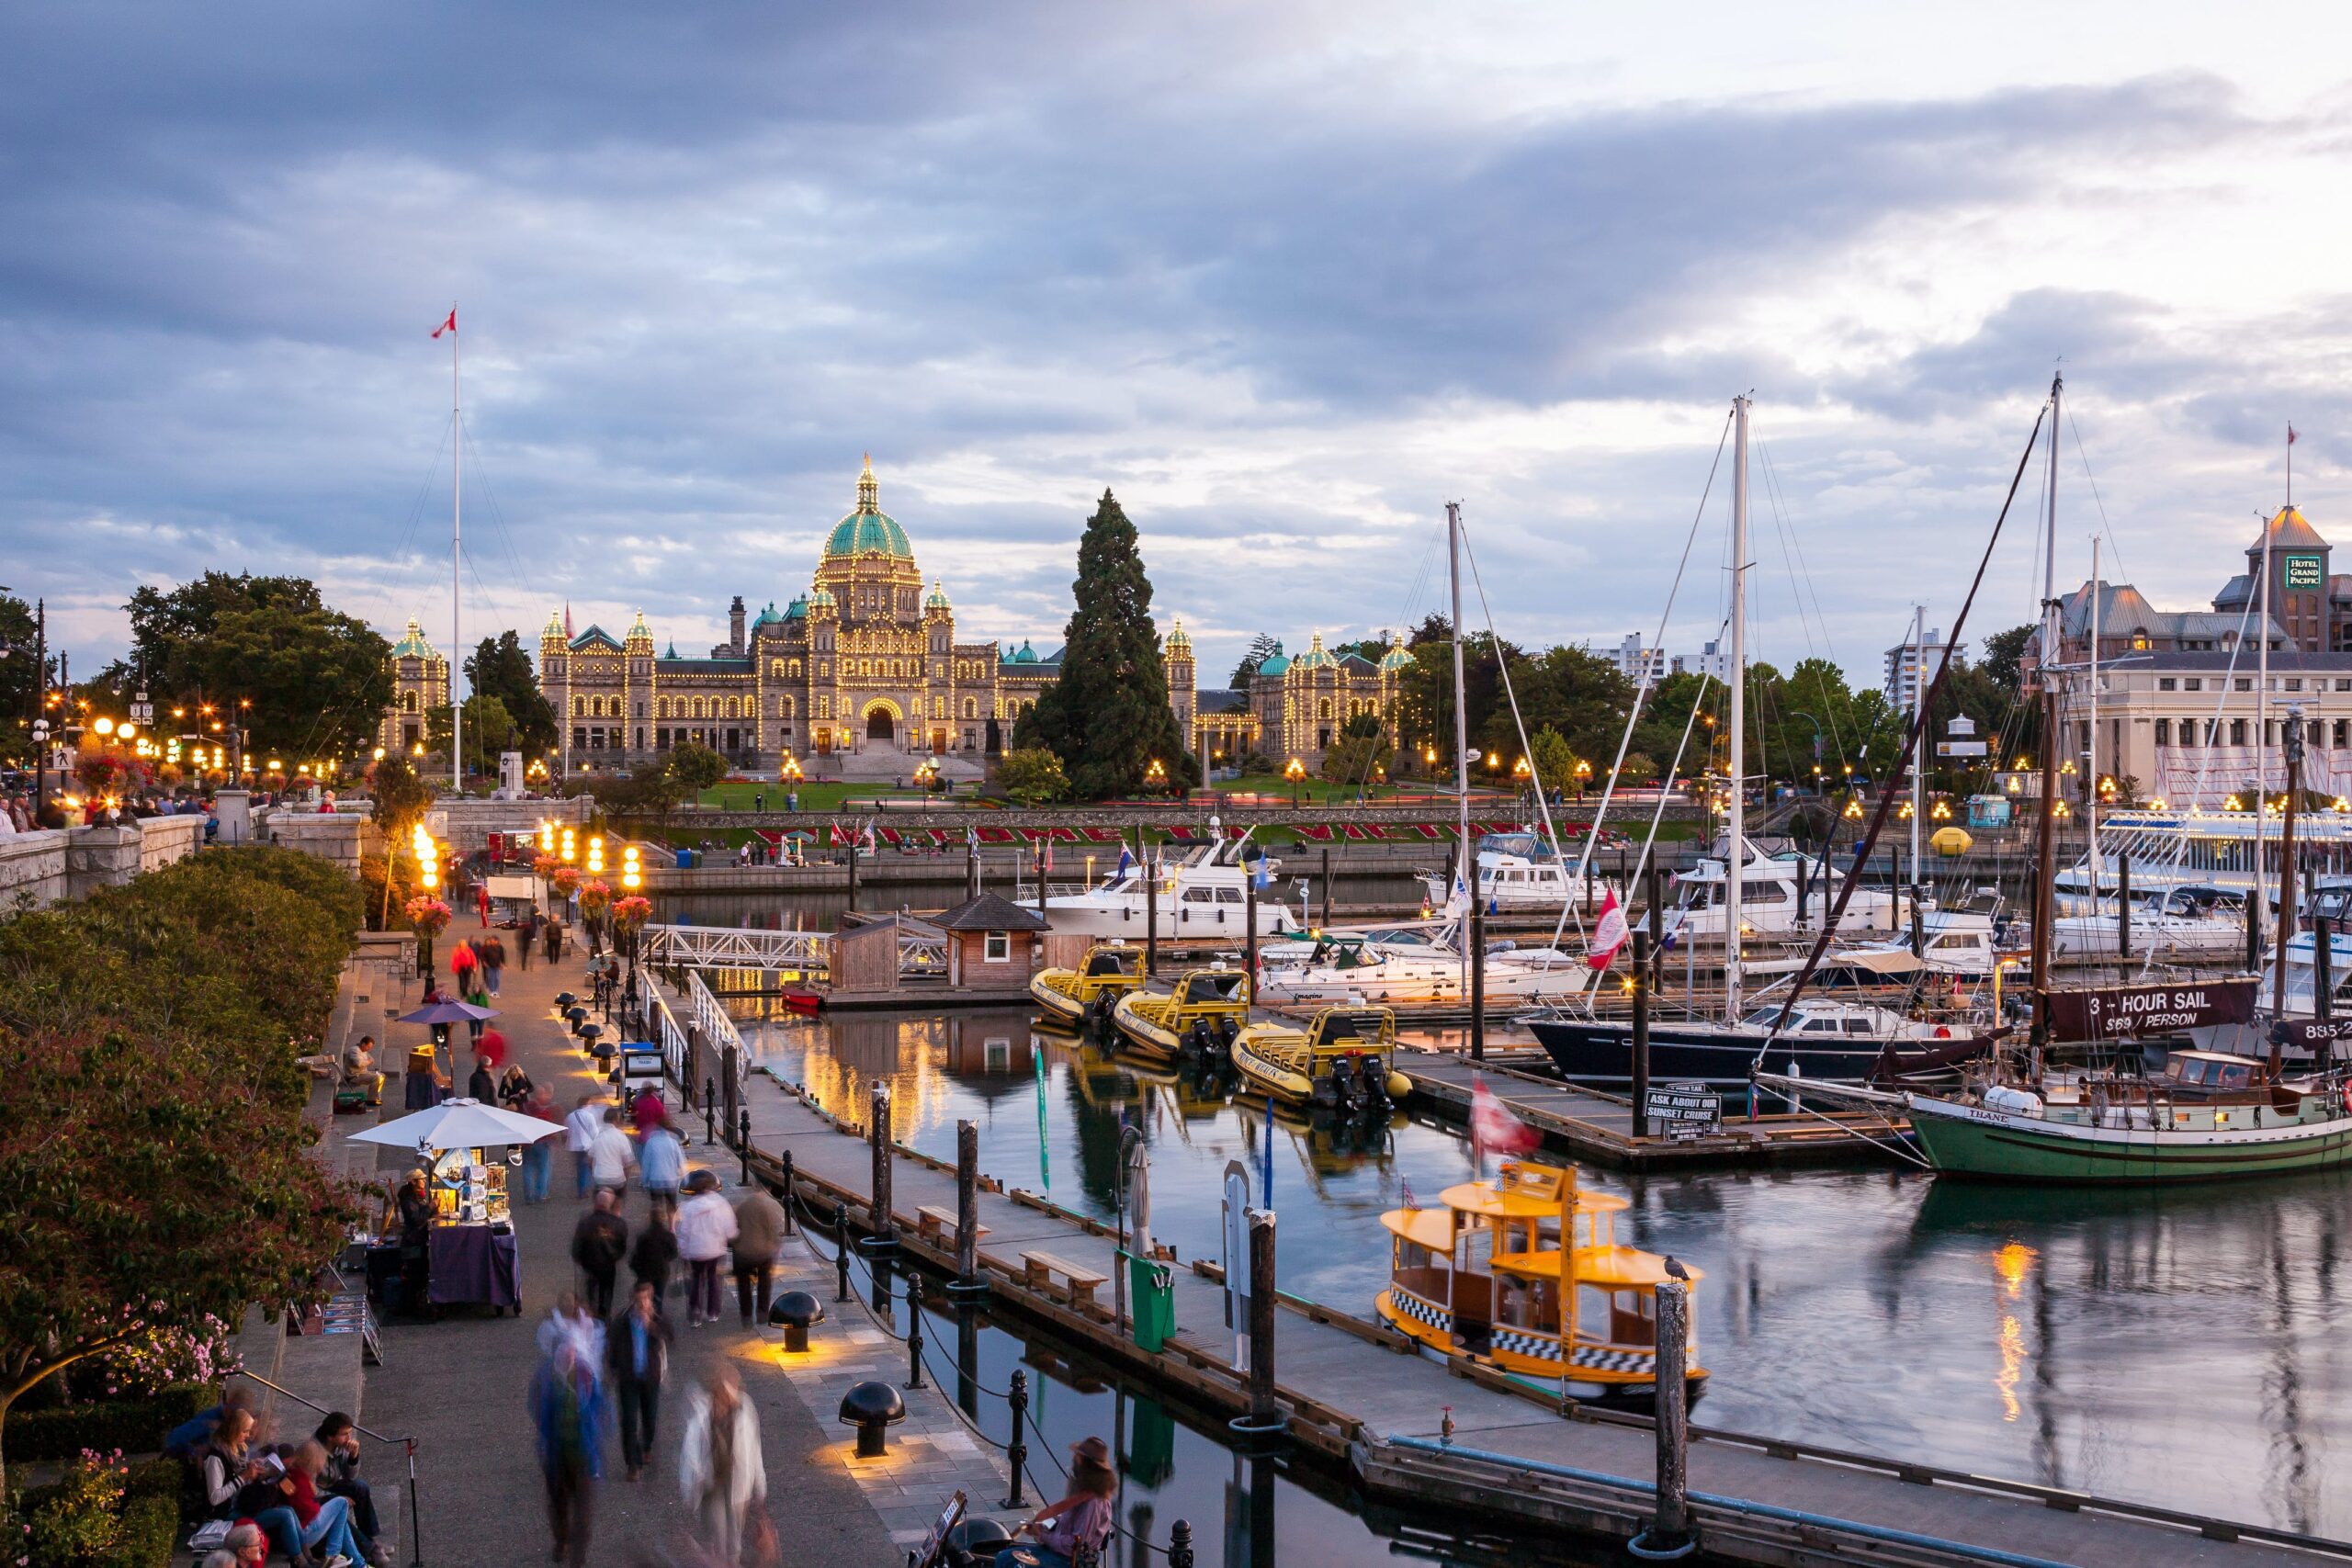 The city of Vancouver, a popular tourist destination, with a view of Victoria.